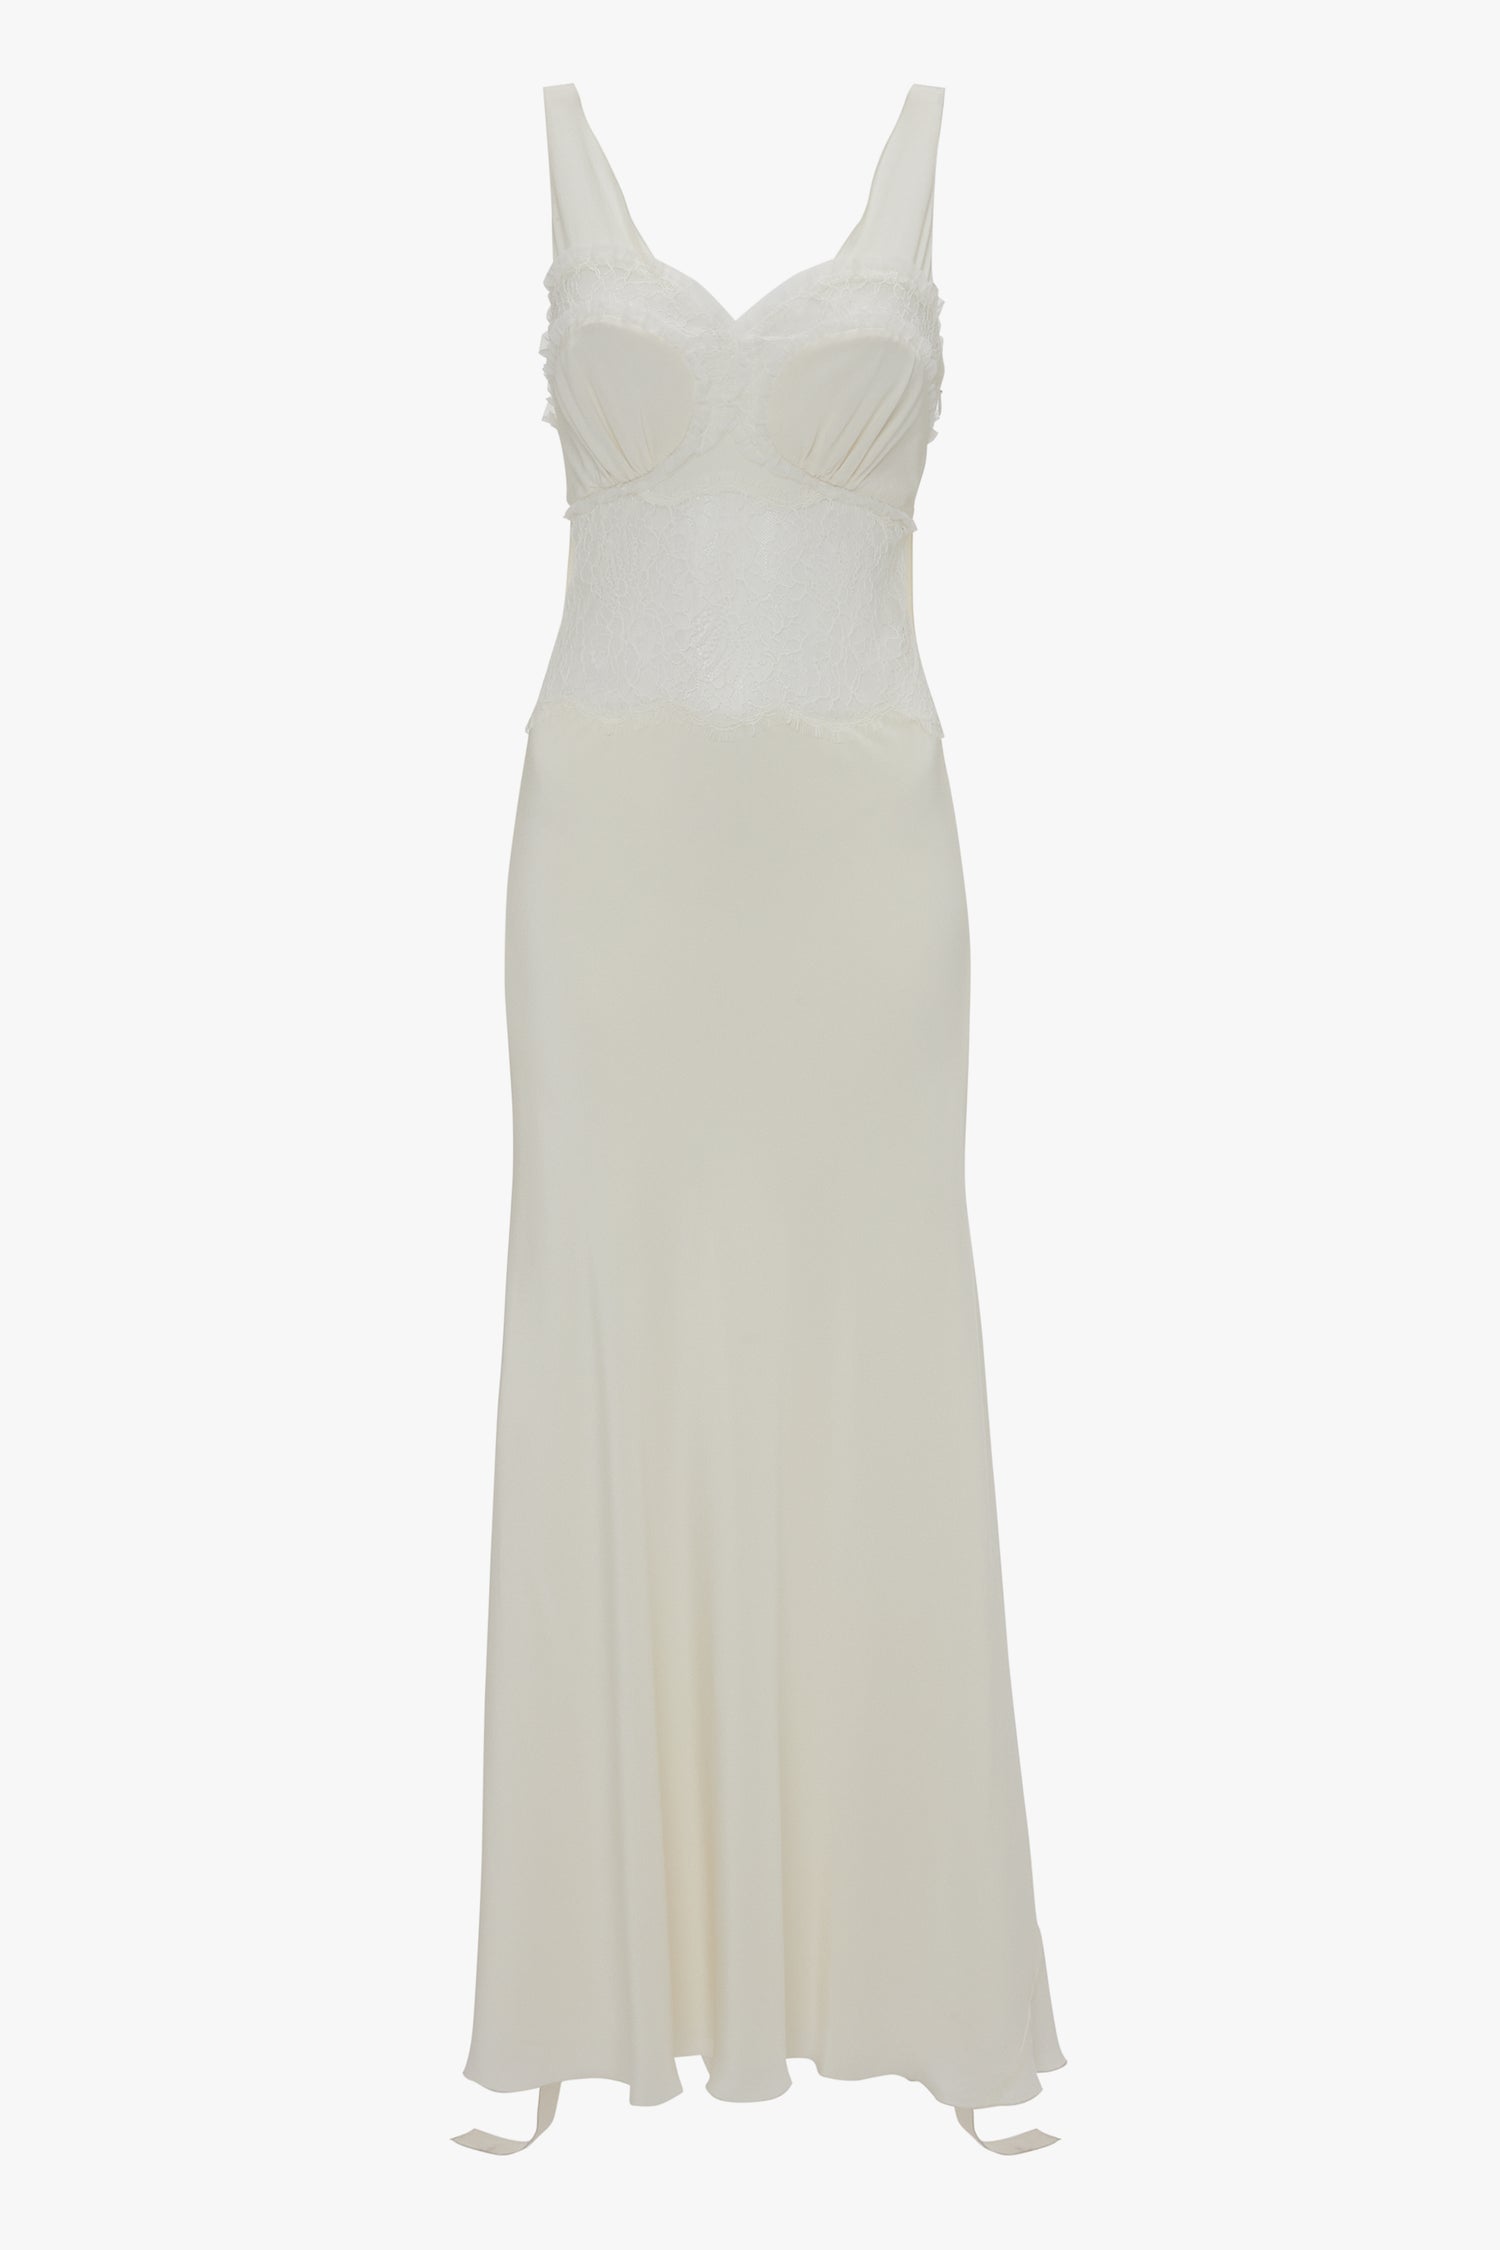 A long, white sleeveless midi dress with a fitted bodice and flowing skirt. The Ruffle Detail Midi Dress In Ivory by Victoria Beckham features lace panels around the bust and midsection.